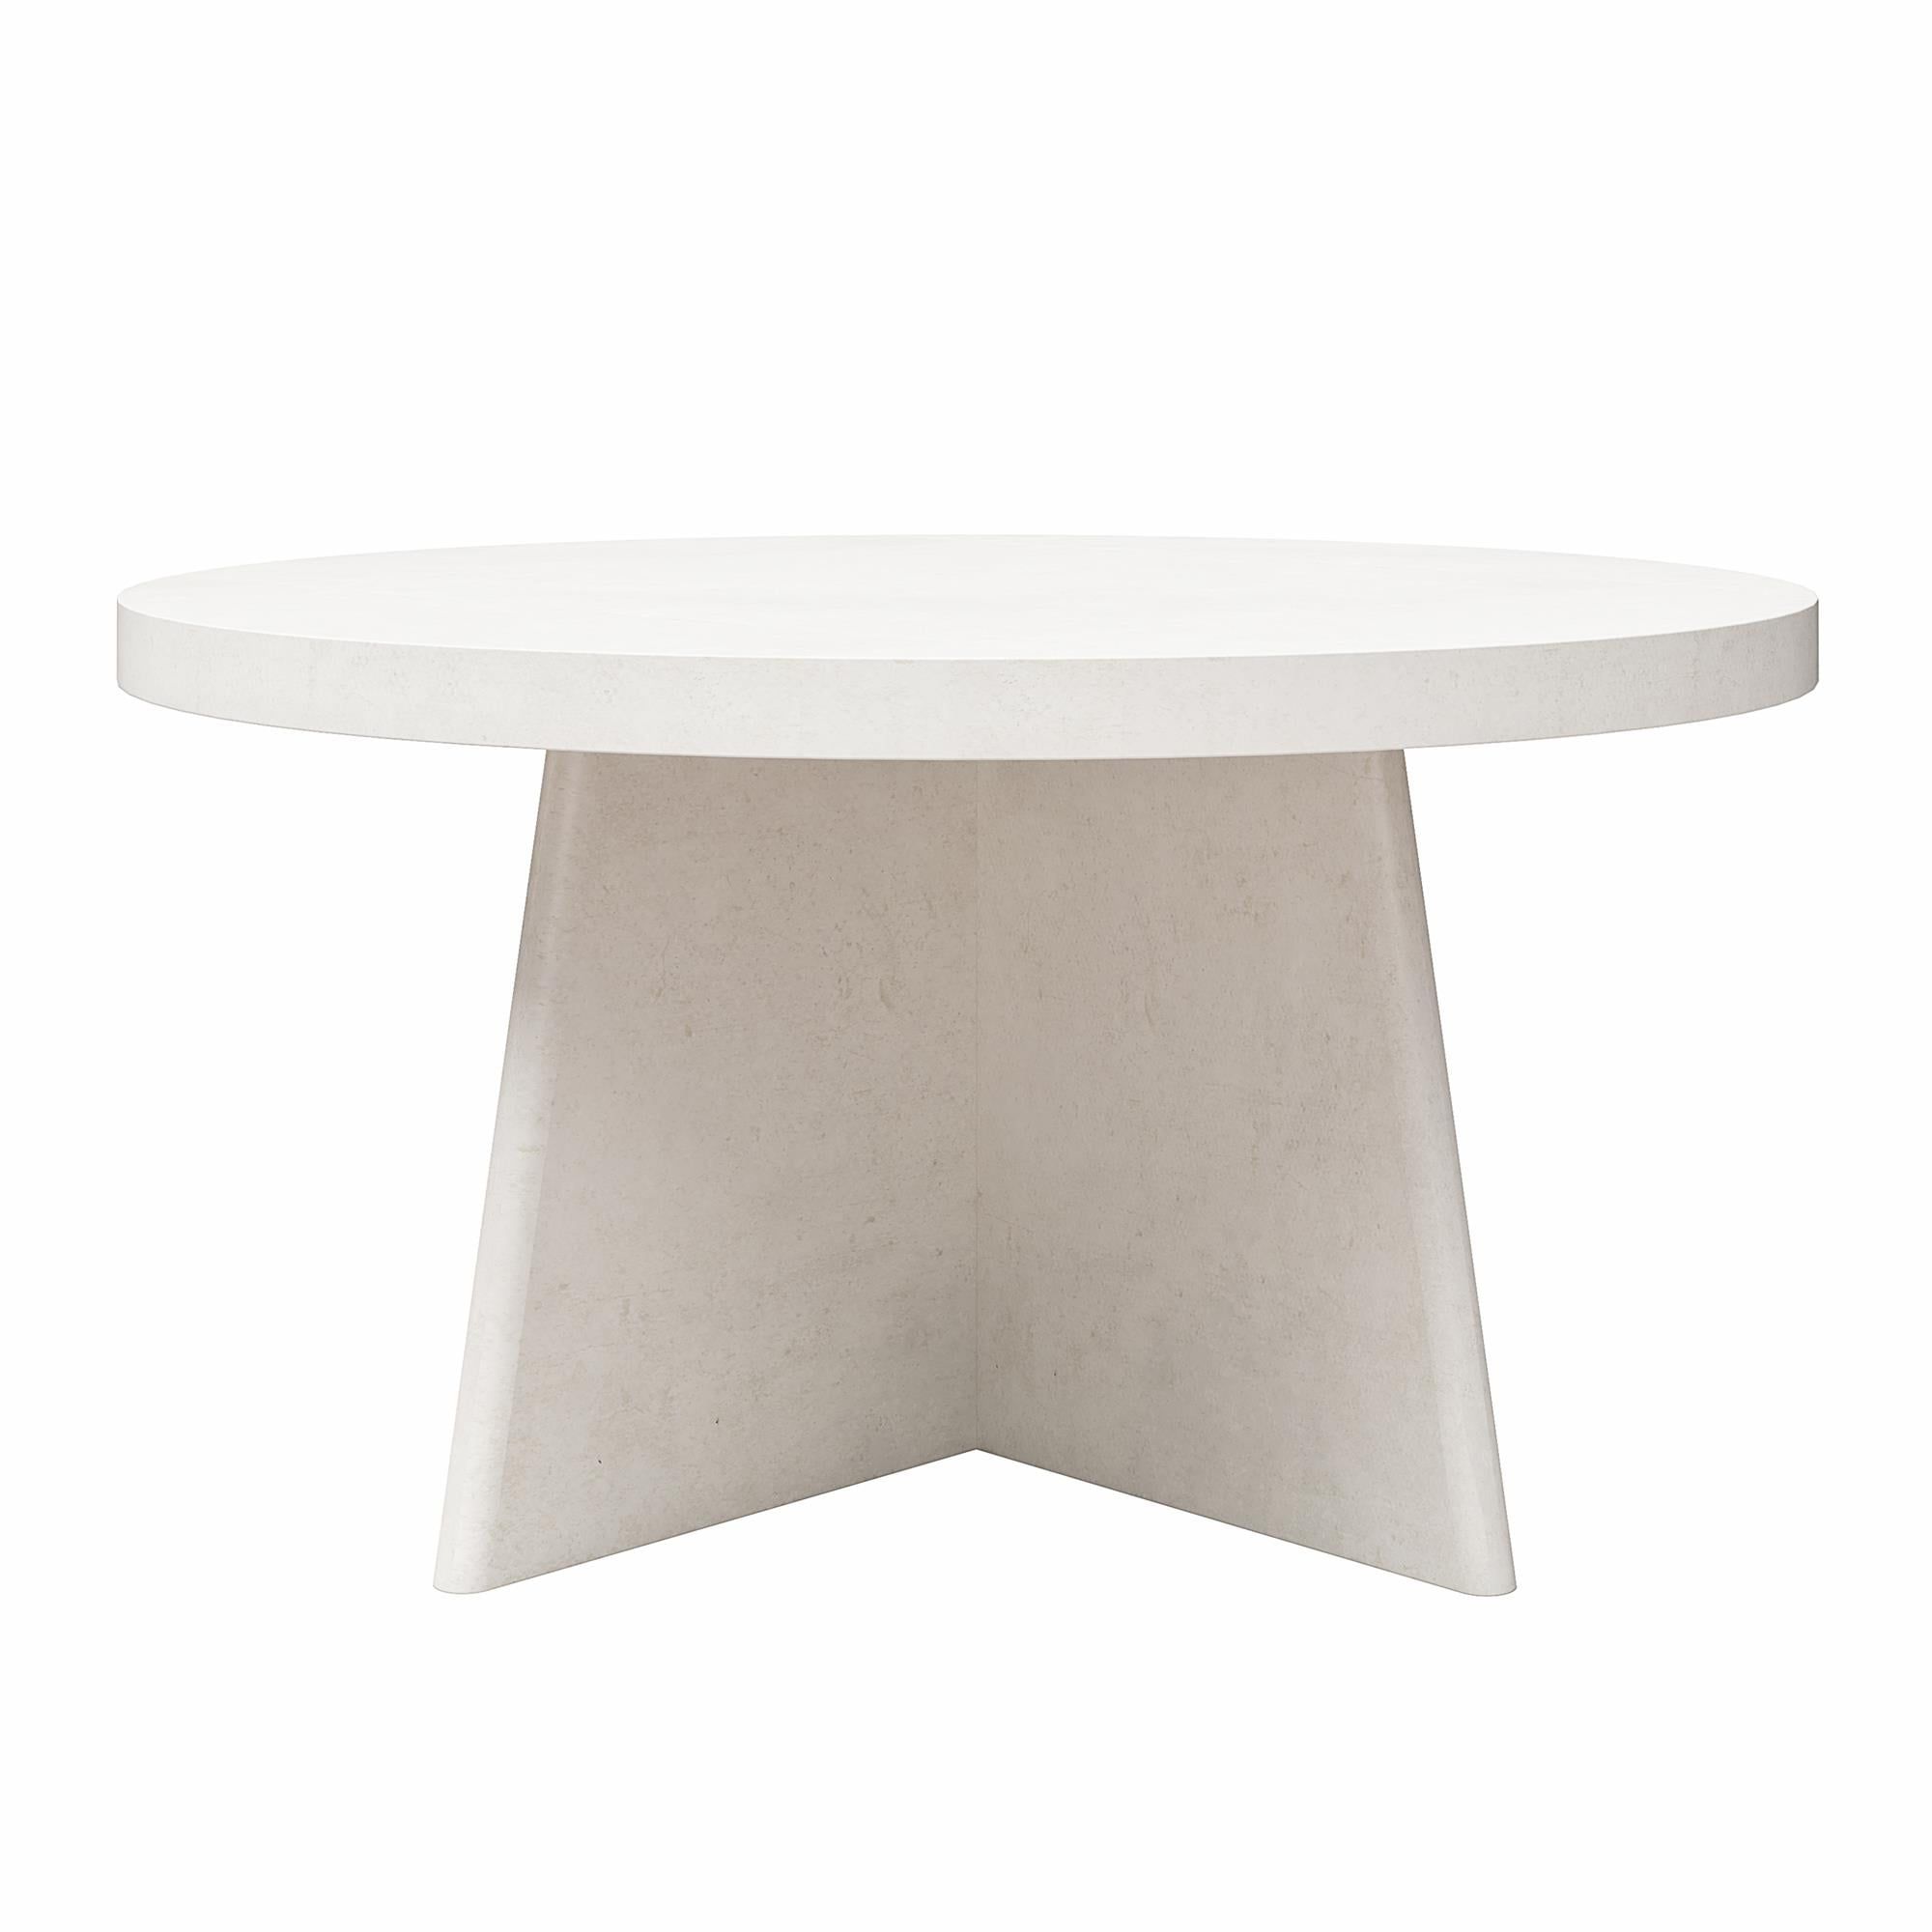 Queer Eye Liam Round Coffee Table, Plaster – Walmart Pertaining To Liam Round Plaster Coffee Tables (View 10 of 20)